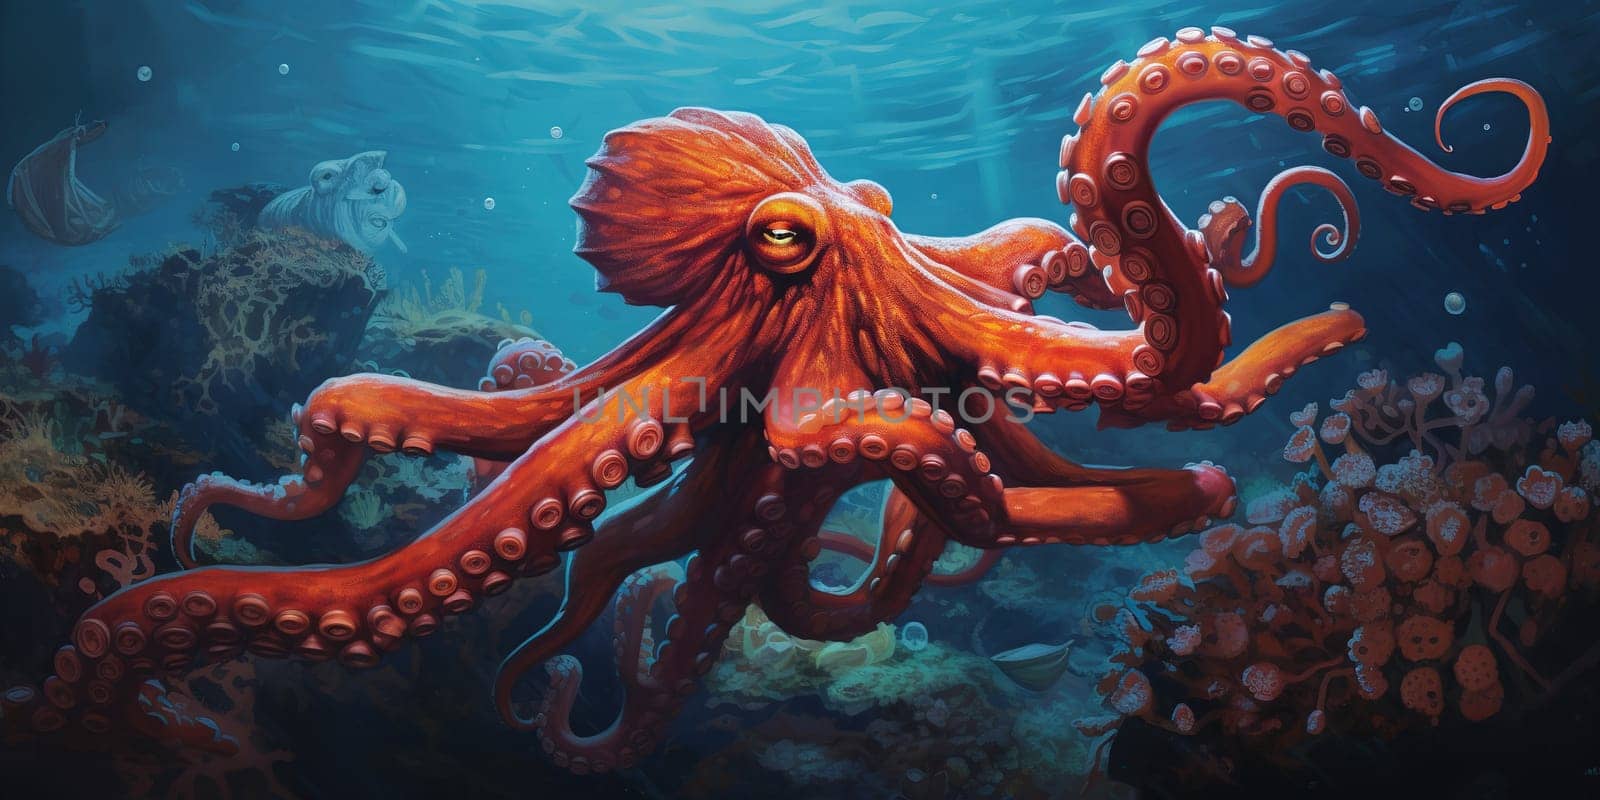 Huge octopus underwater at a sea, nature and wildlife concept